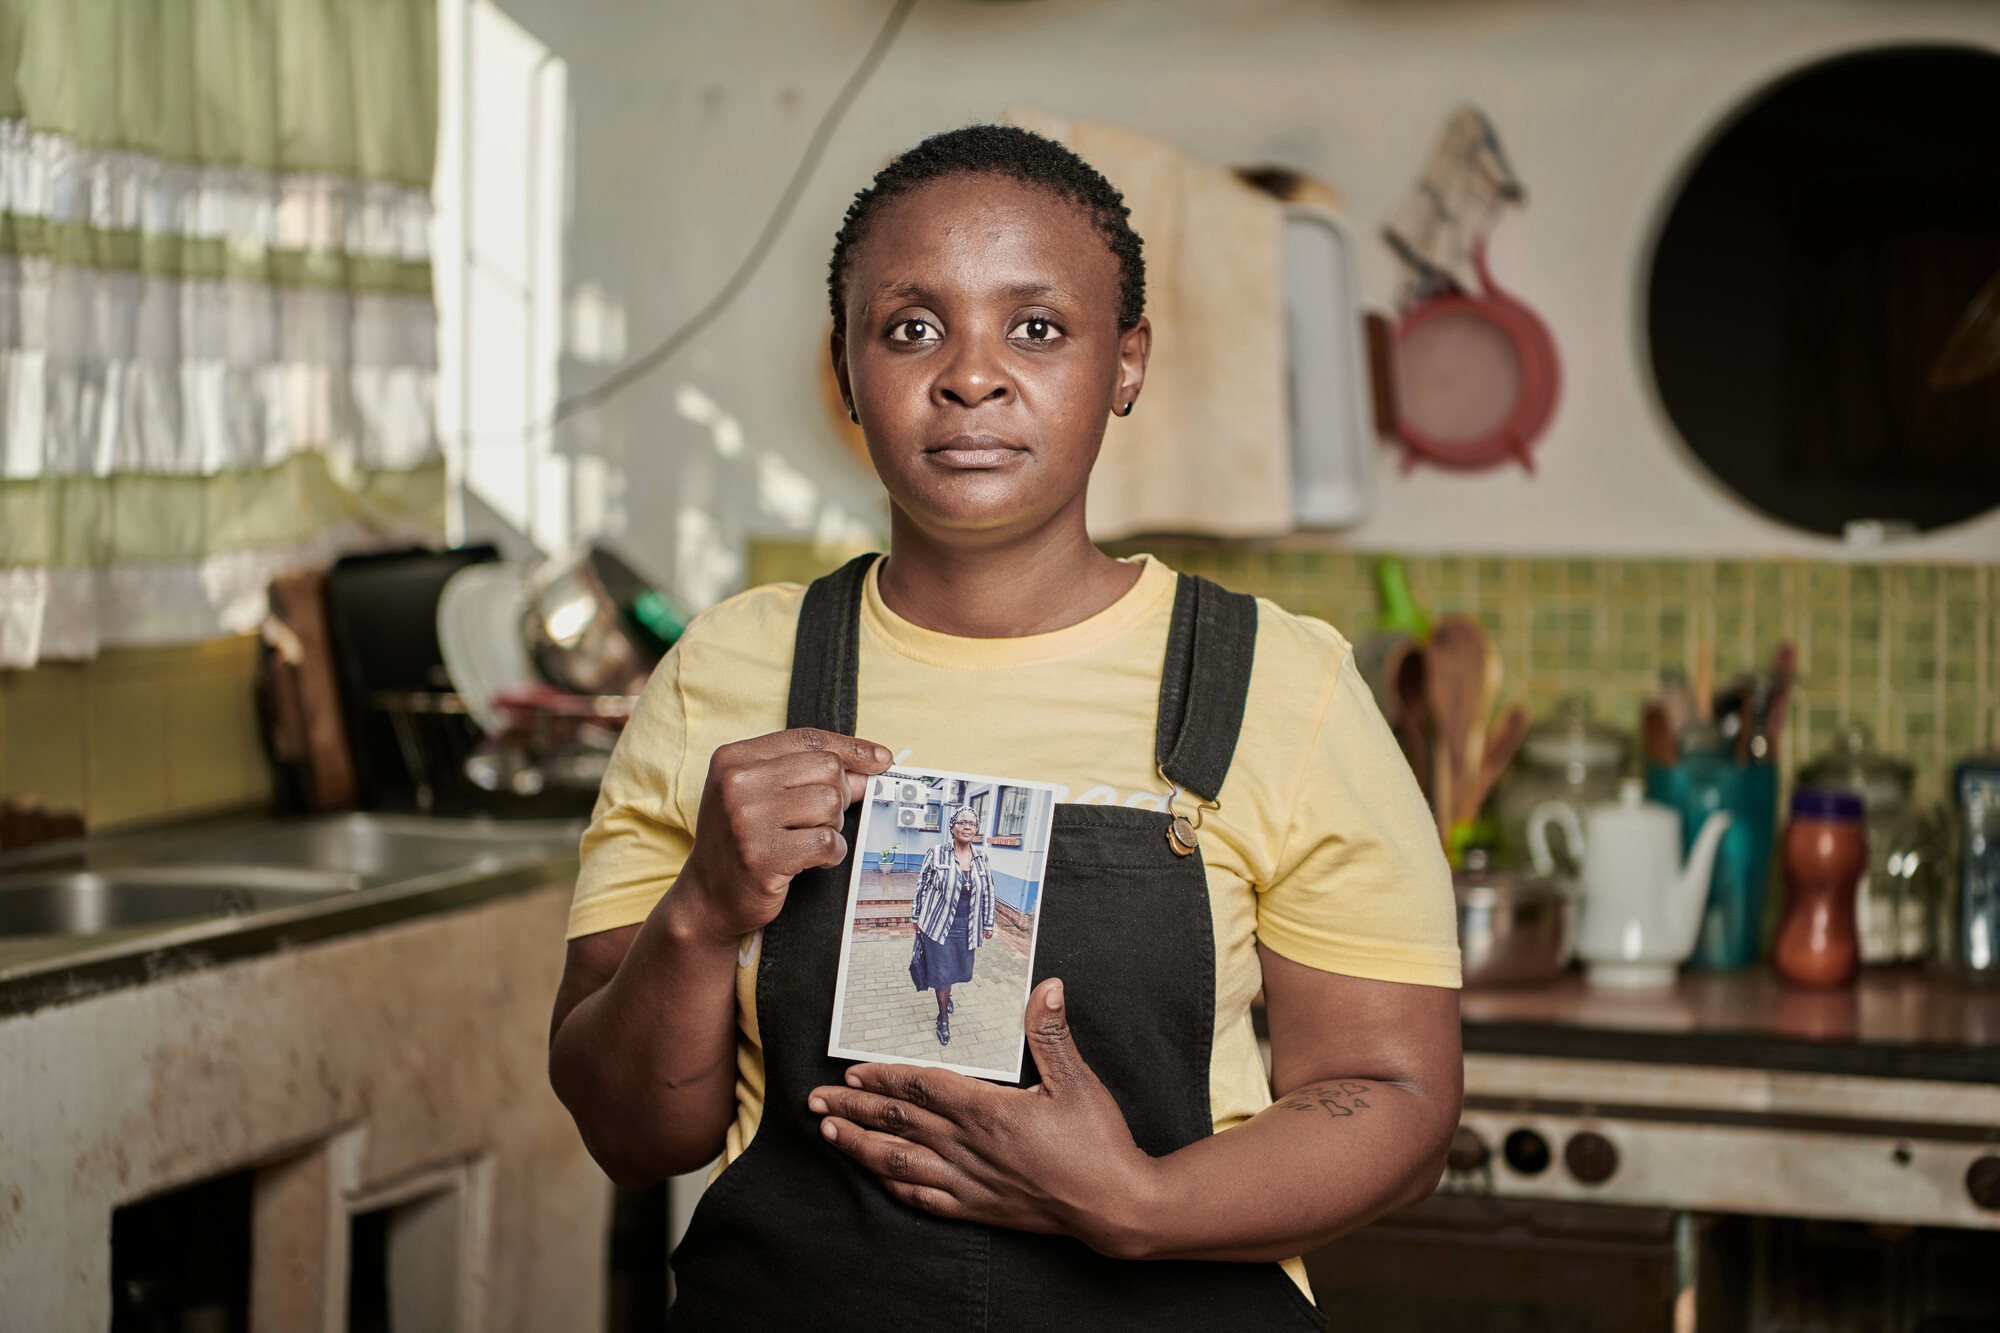 Awoman wearing a light yellow t-shirt and navy blue overalls holds a picture of her mother, an older woman. In the background you can see a kitchen with light beige walls and lime green tiles.